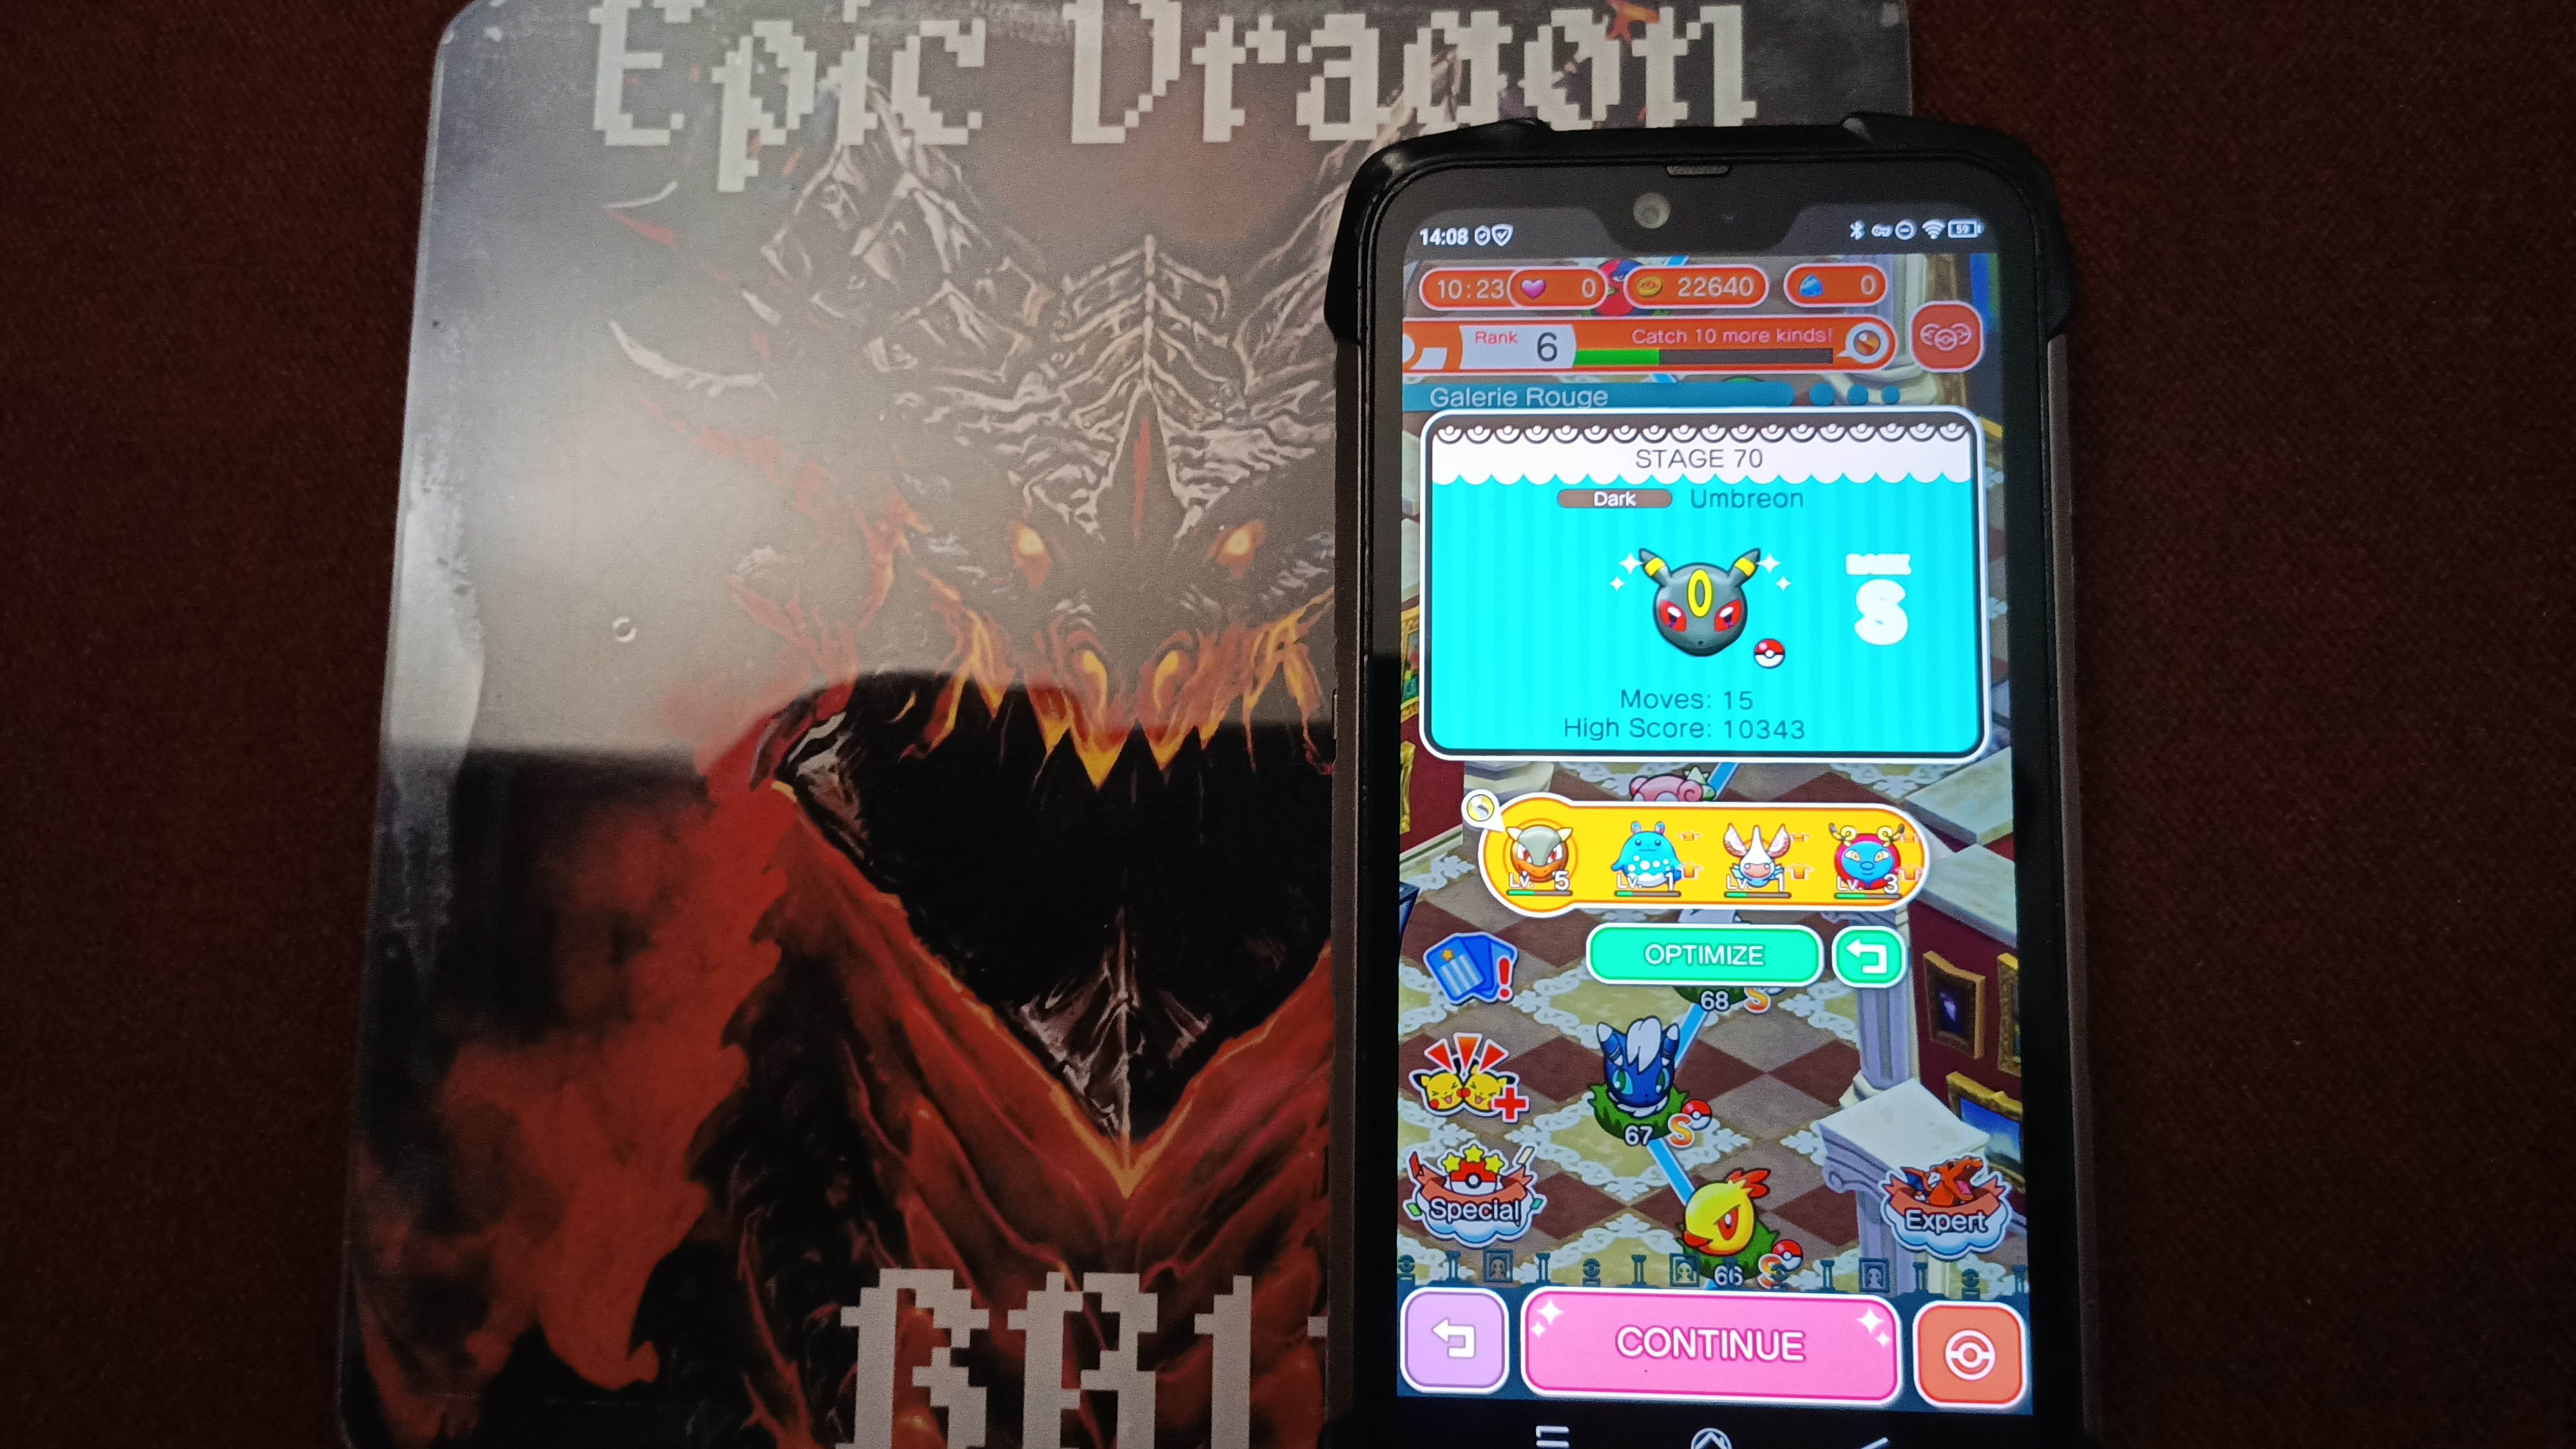 EpicDragon: Pokemon Shuffle Mobile: Stage 070 (Android) 10,343 points on 2022-09-16 16:48:09